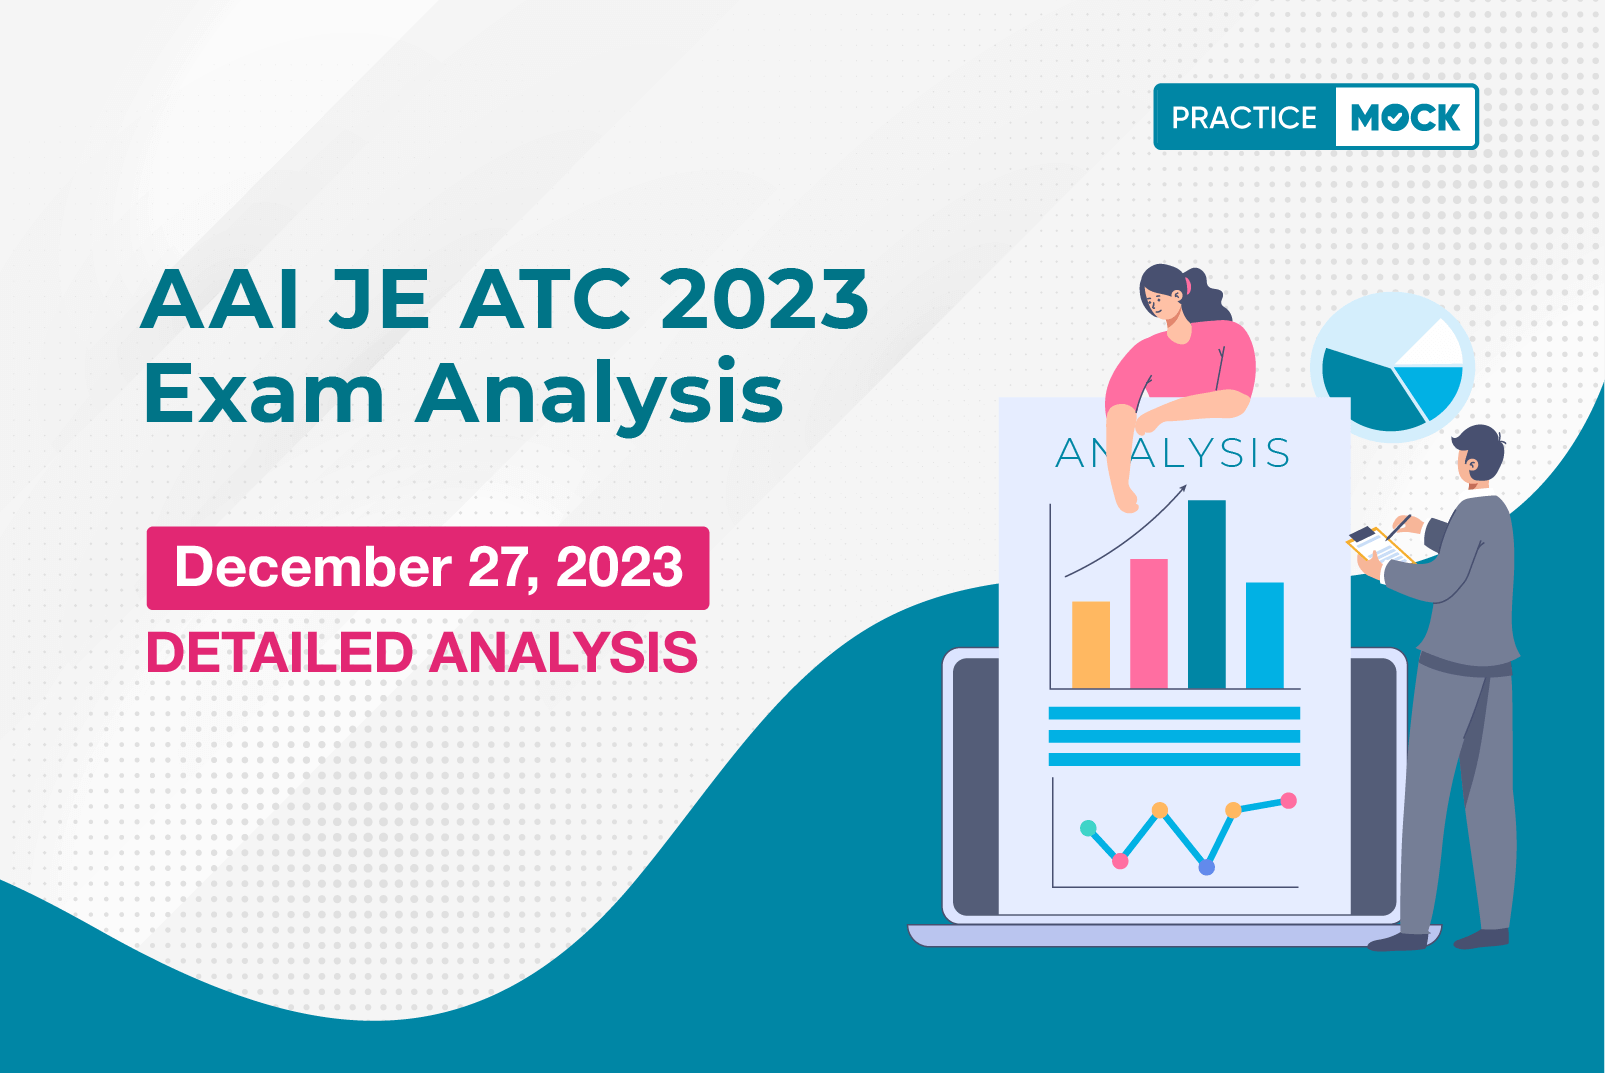 AAI JE ATC Exam Analysis 2023: Topic-wise Breakdown, Difficult Level, and More